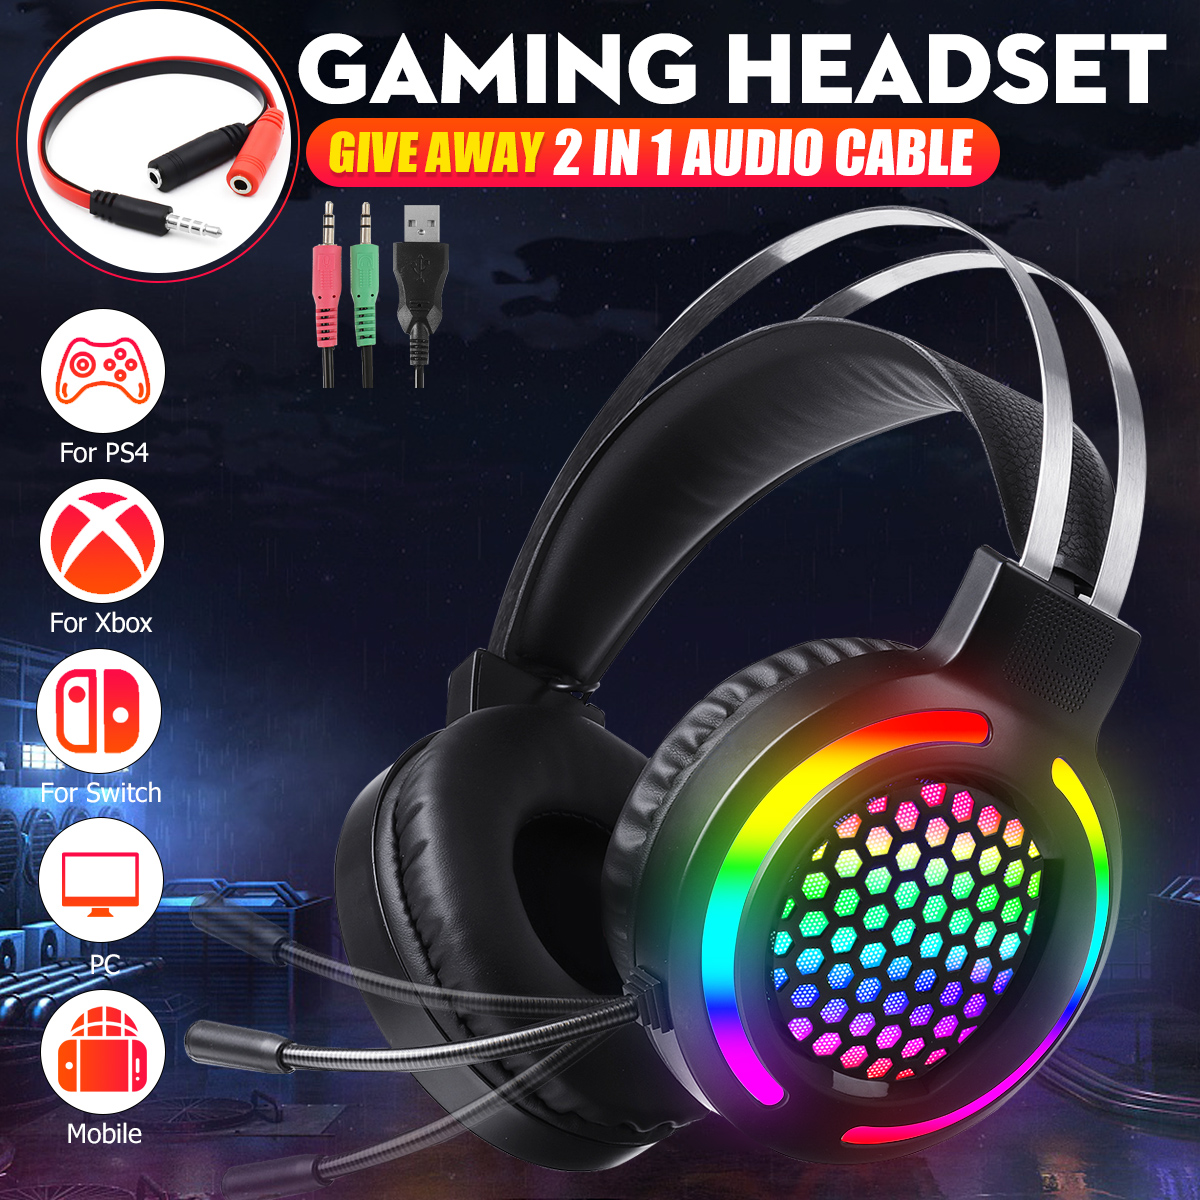 Bakeey-USB--35mm-Stereo-Gaming-Headsets-Noise-Cancelling-Surround-Sound-Headphone-with-LED-Light-Mic-1831516-1